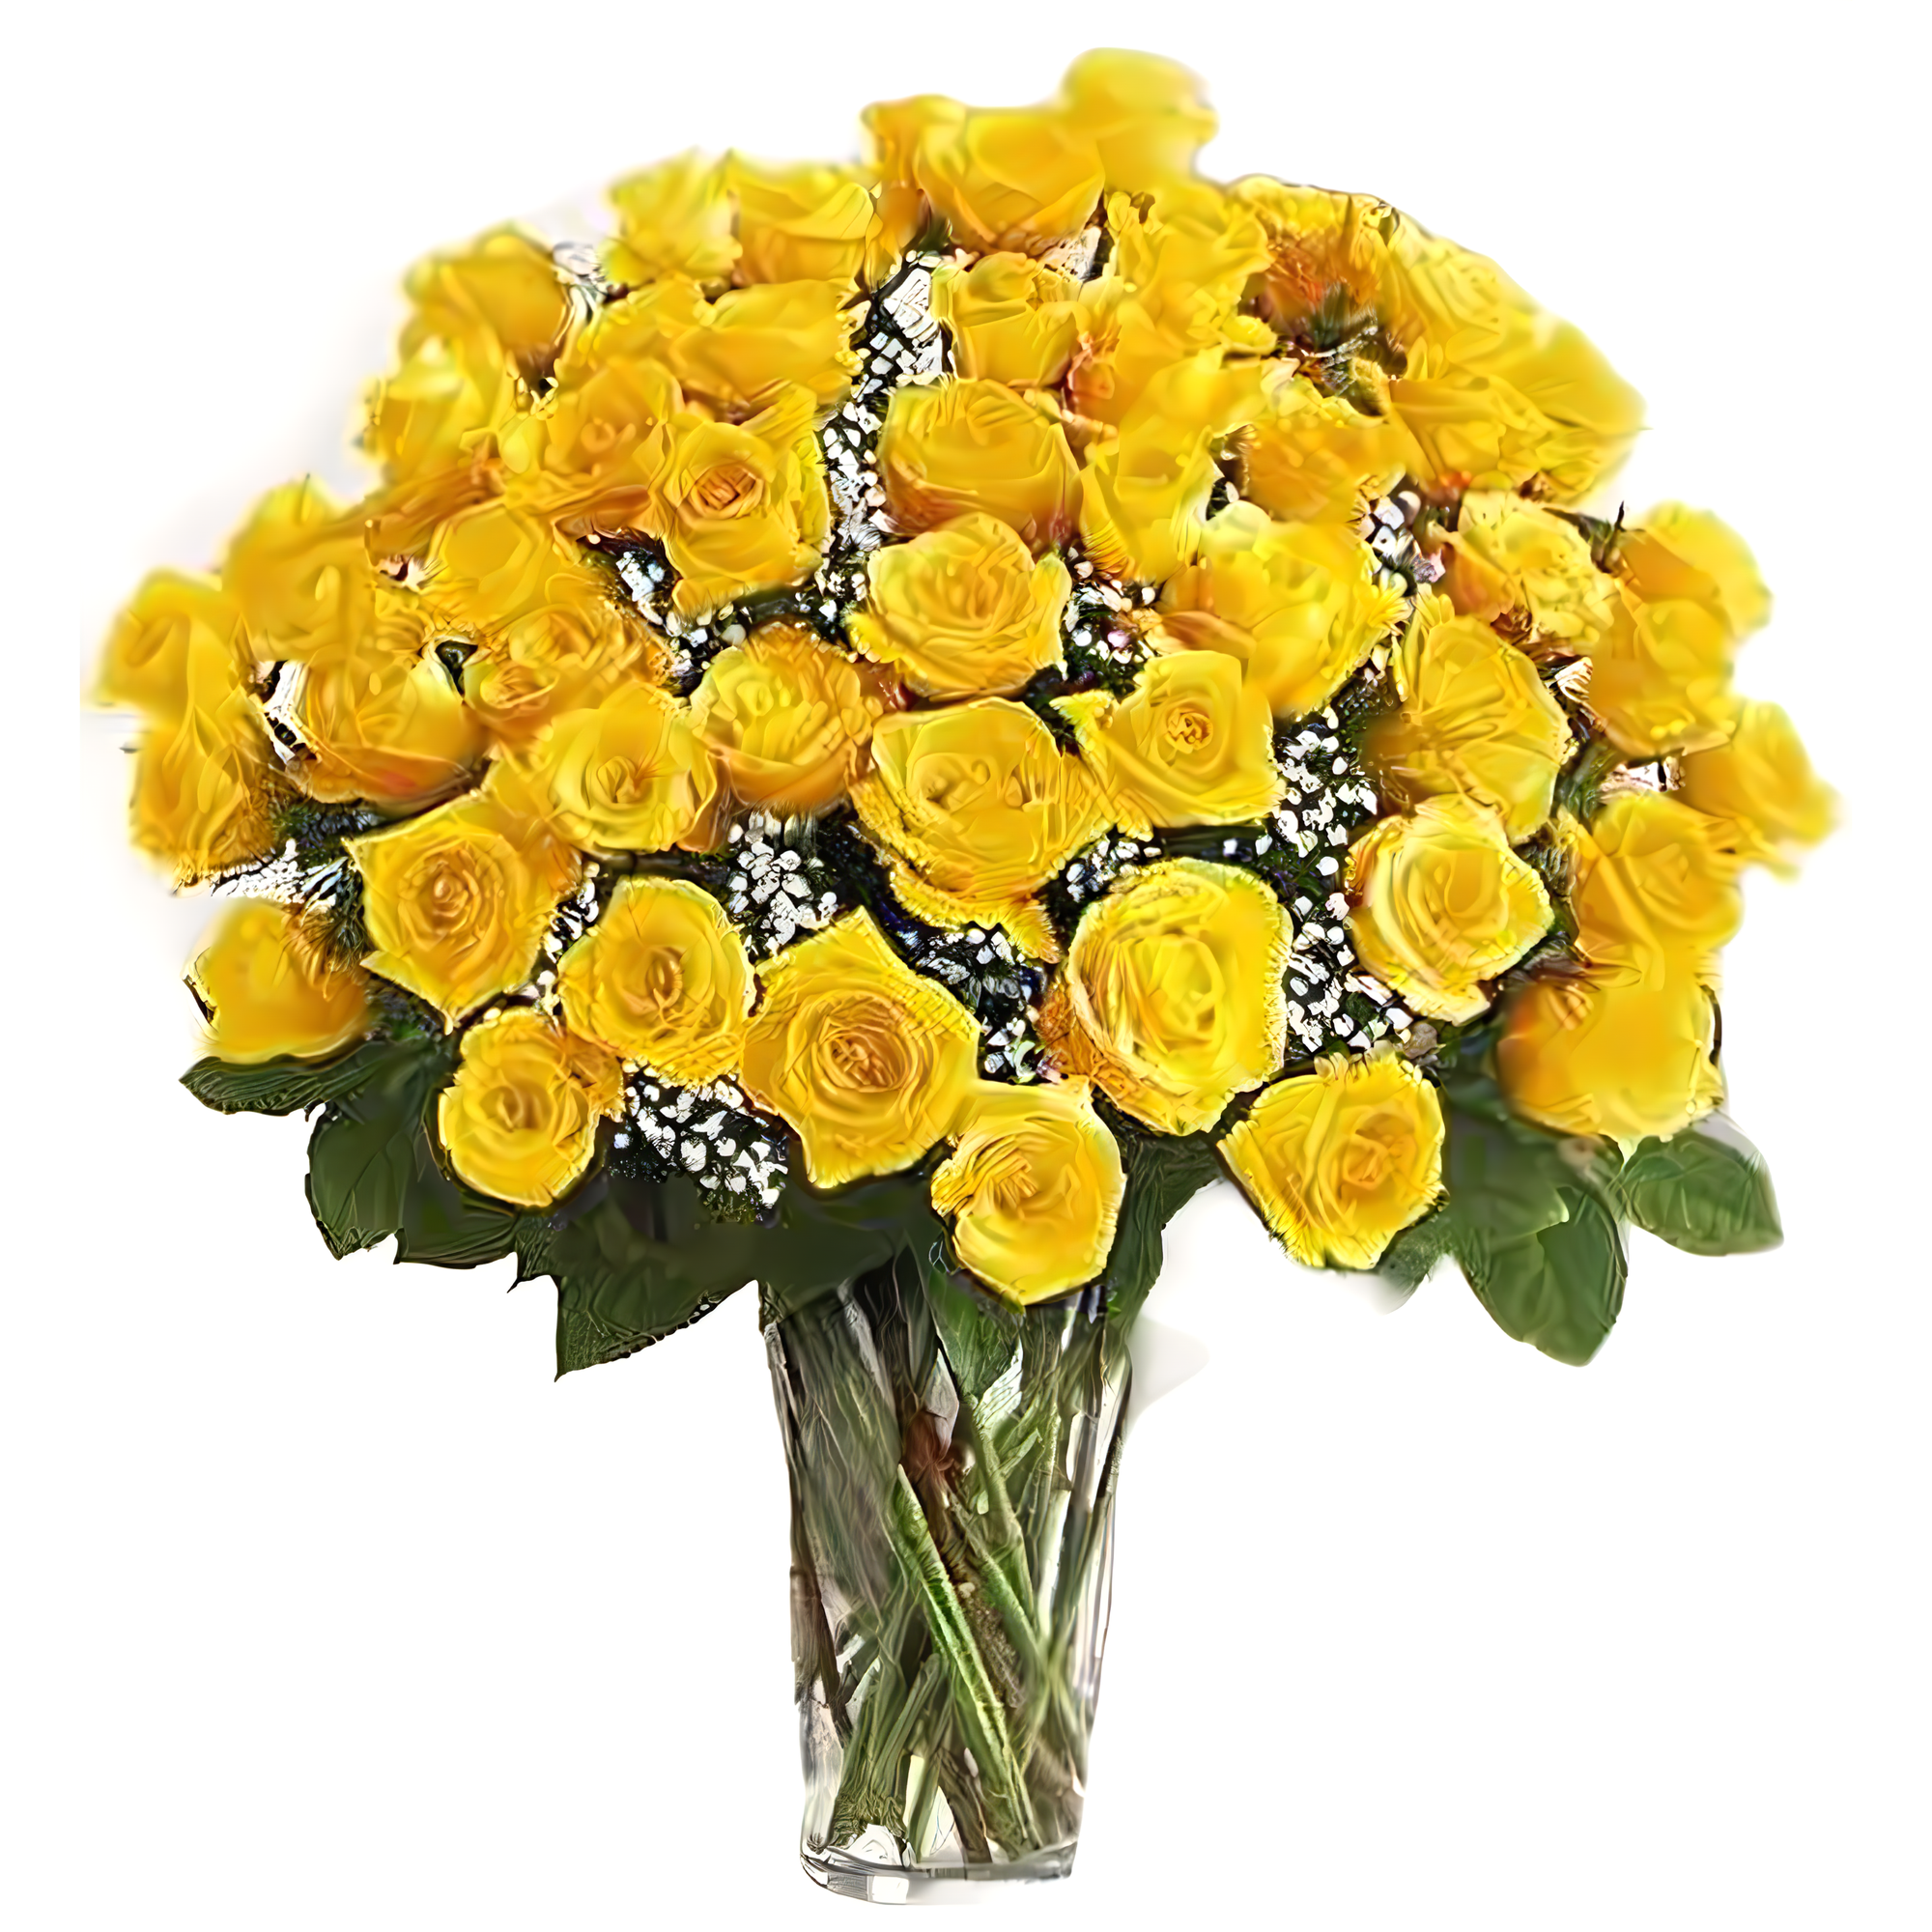 Manhattan Flower Delivery - Long Stem 48 Yellow Roses - Roses